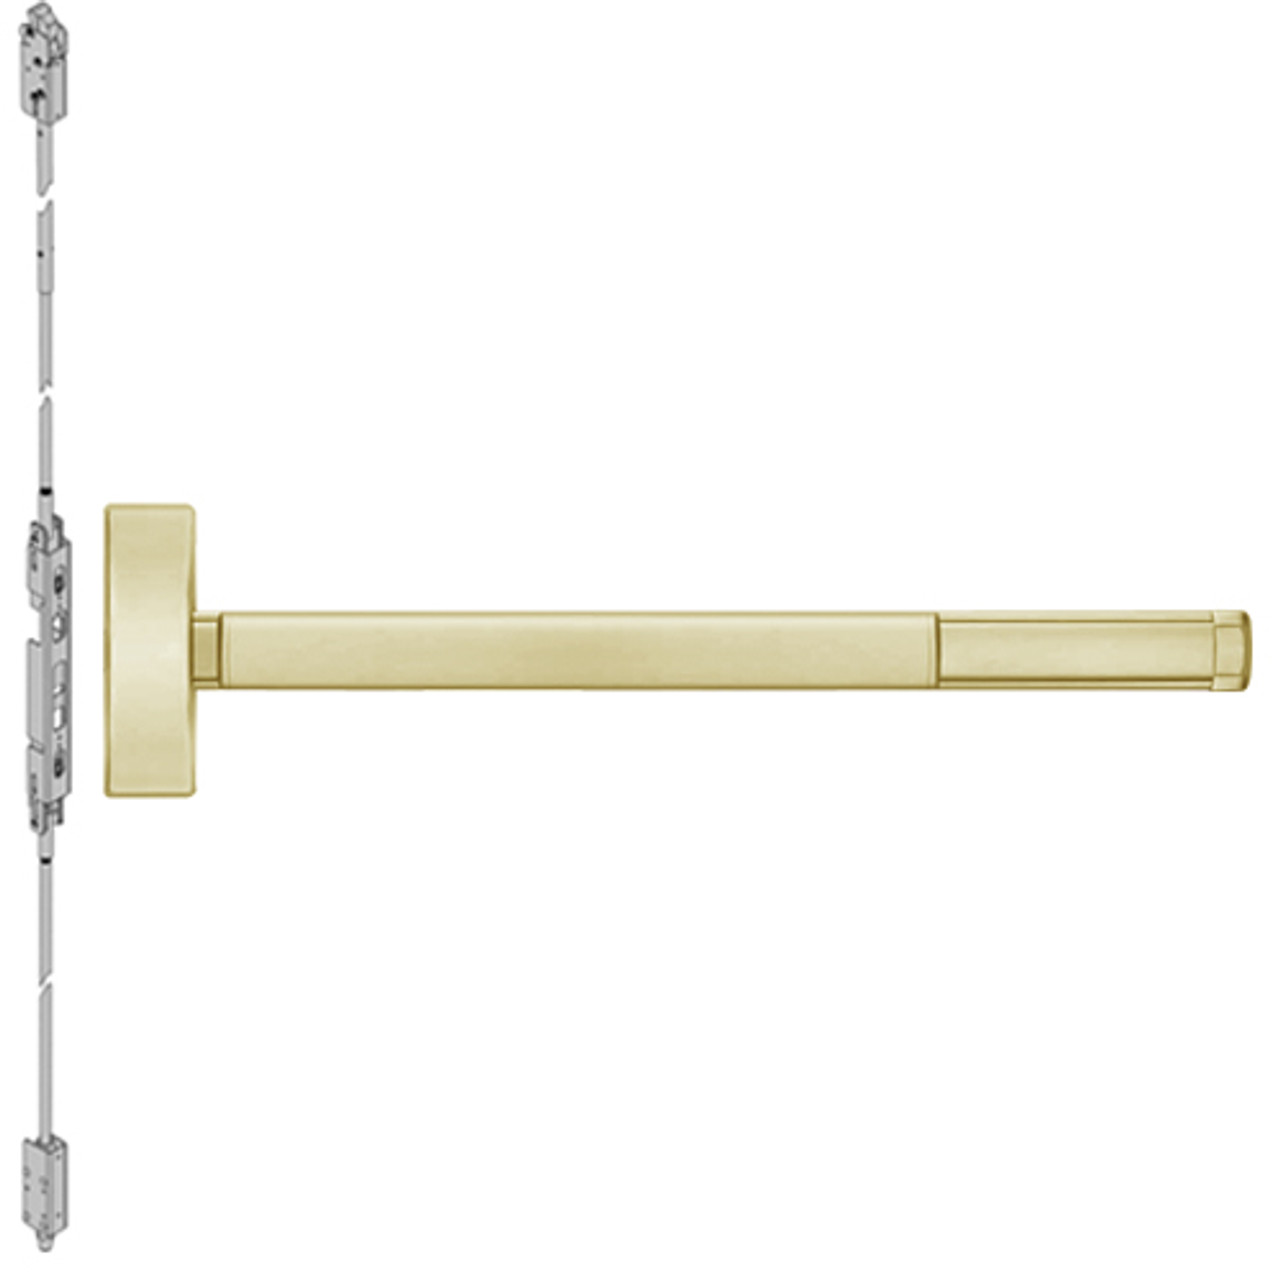 DE2803LBR-606-36 PHI 2800 Series Concealed Vertical Rod Exit Device with Delayed Egress Prepped for Key Retracts Latchbolt in Satin Brass Finish